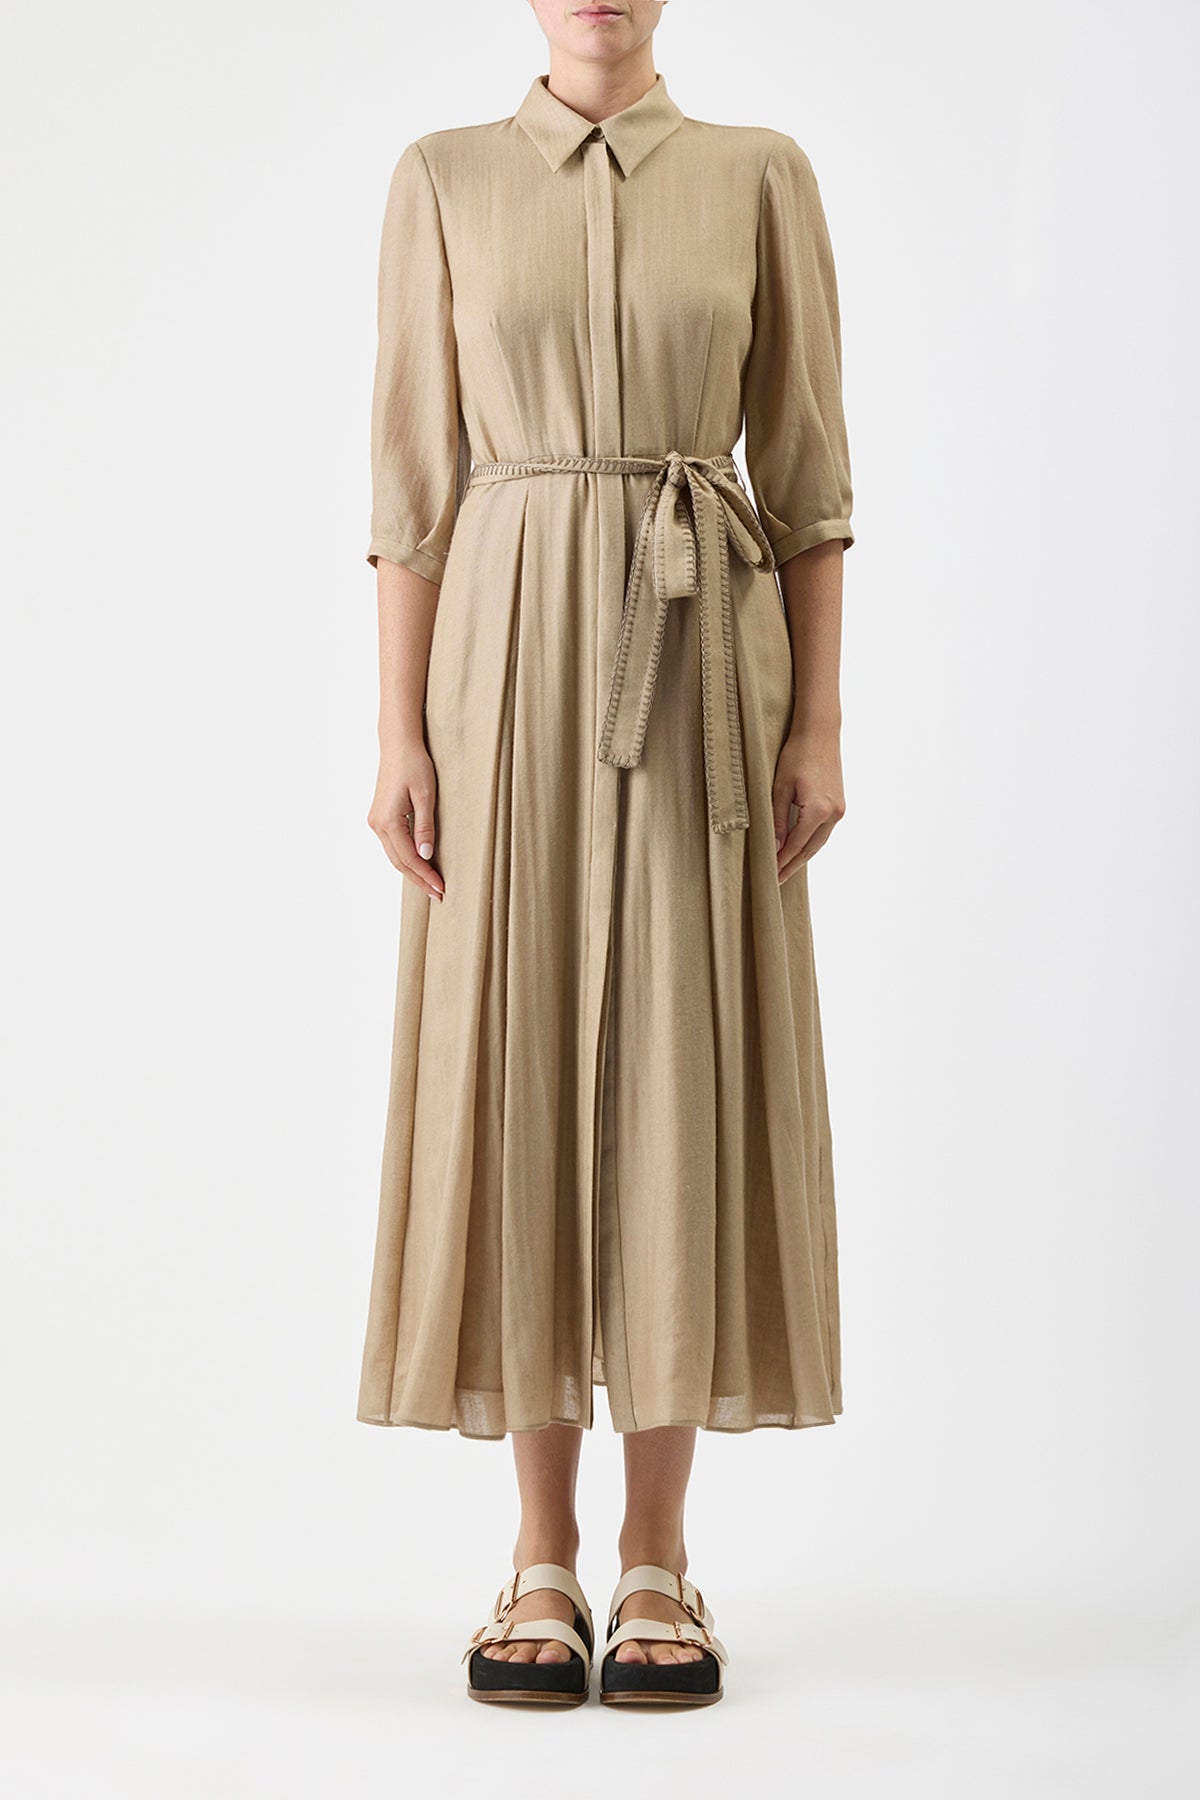 Andy Dress in Khaki Cashmere Wool